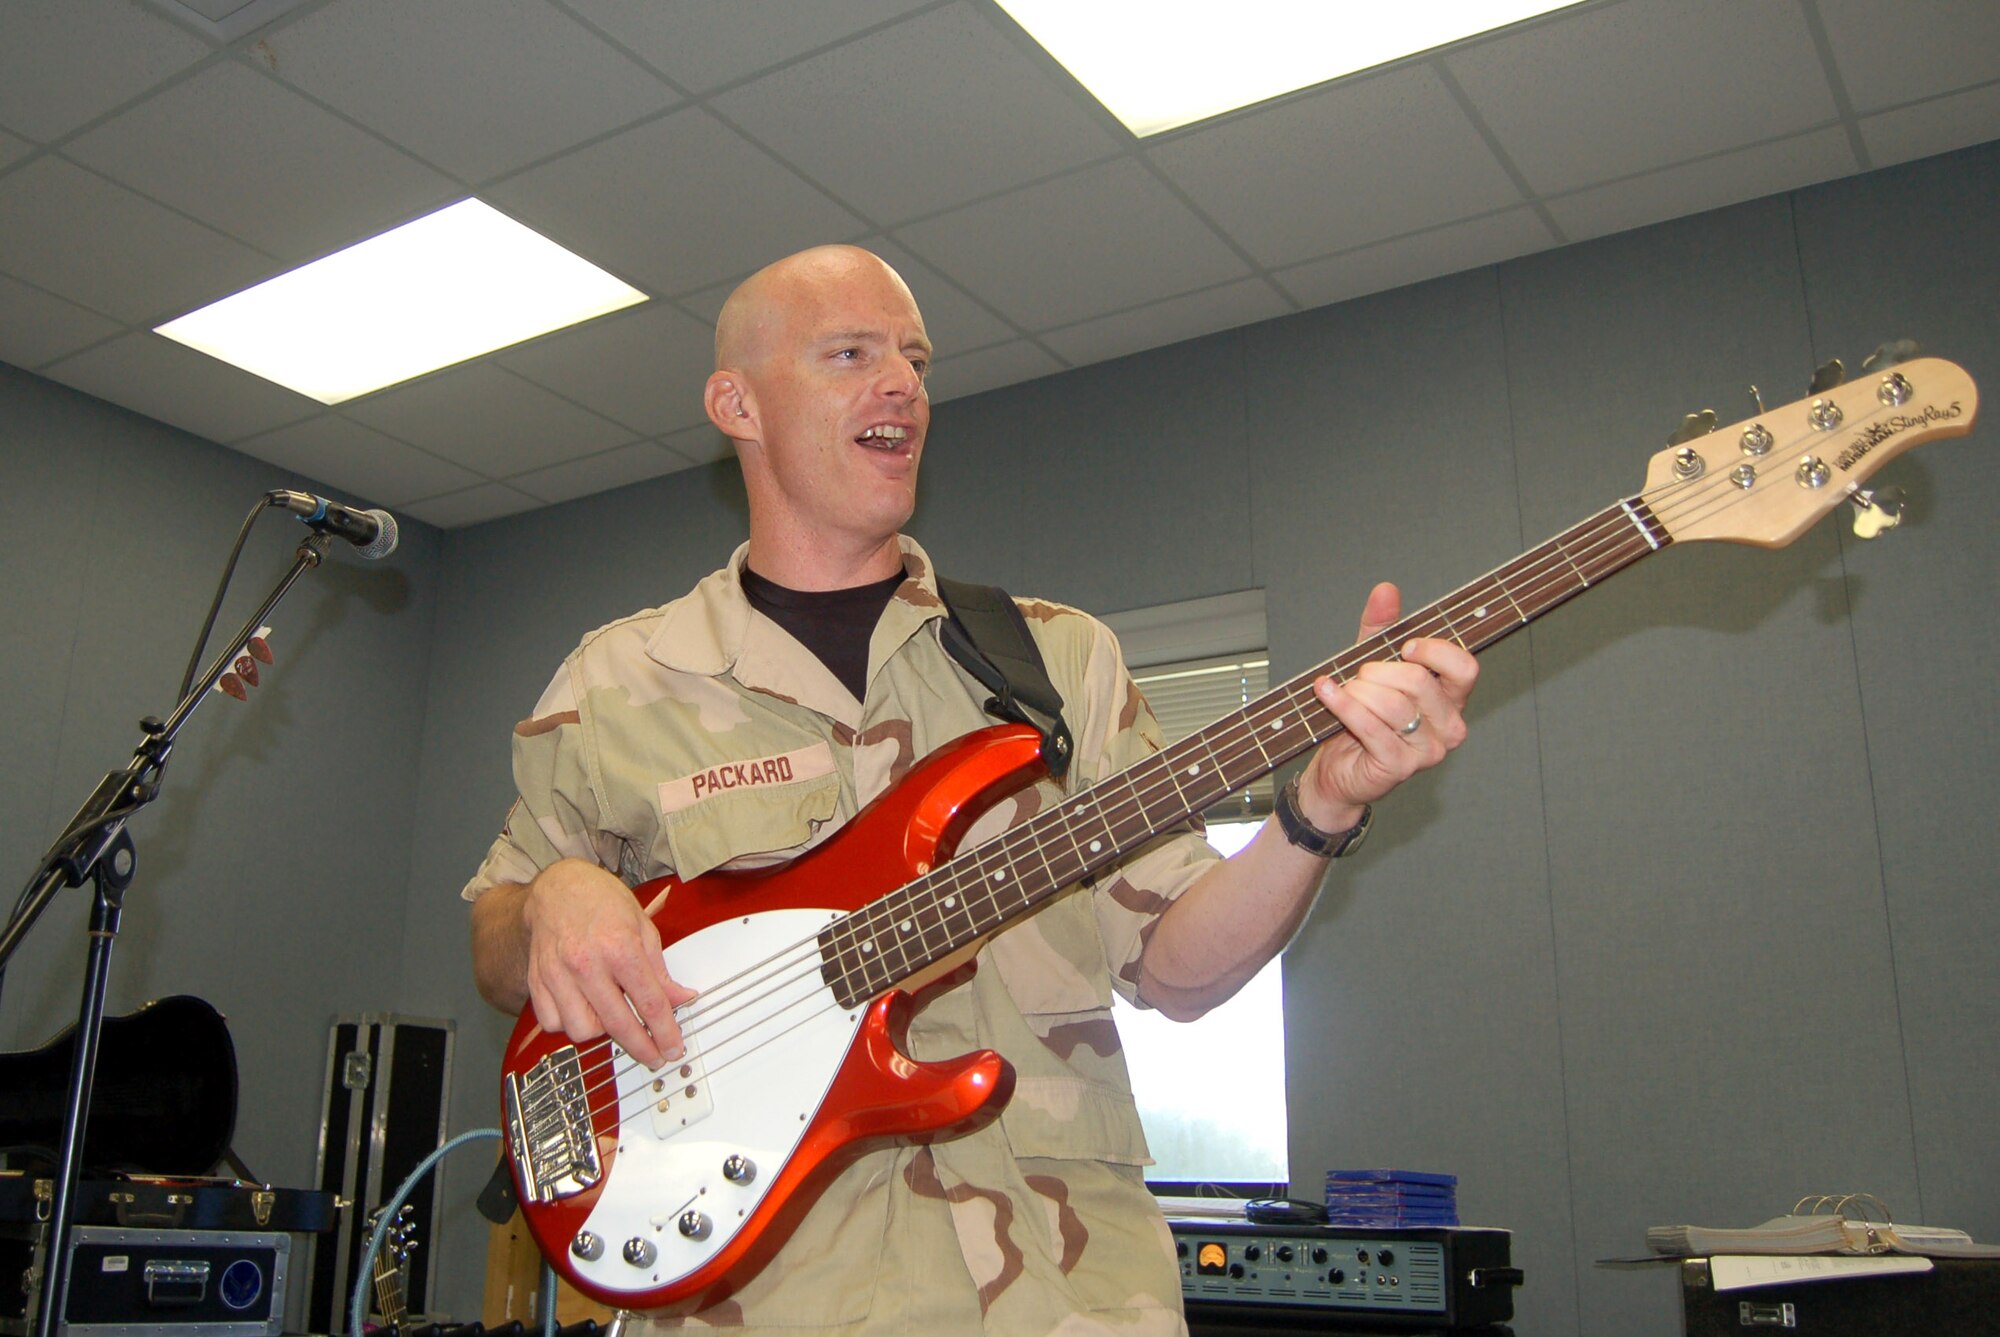 Bass guitarist and vocalist Tech. Sgt. Jonathan Packard rehearses Oct. 4. He is with the Air Force Band of the West's Top Flight rock band at Lackland Air Force Base, Texas.  The band will be deploying soon to Southwest Asia.  (U.S. Air Force photo/Staff Sgt. Shad Eidson) 